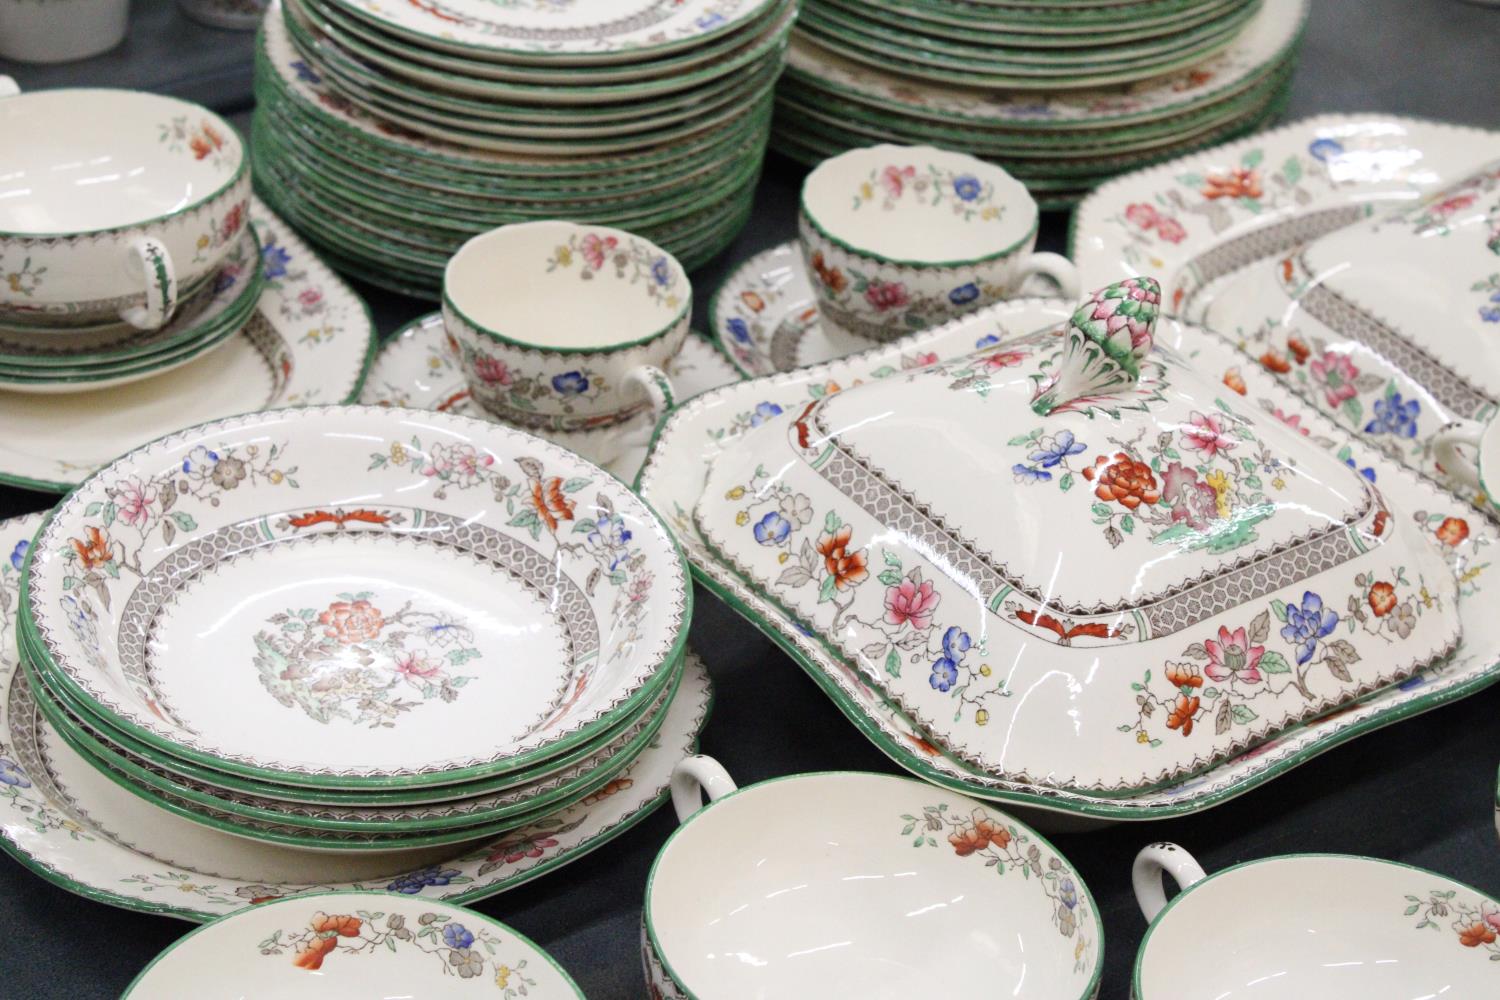 A LARGE SPODE COPELAND "CHINESE ROSE" DINNER SERVICE TO INCLUDE PLATES, SOUP BOWLS, JUGS, A - Image 6 of 9